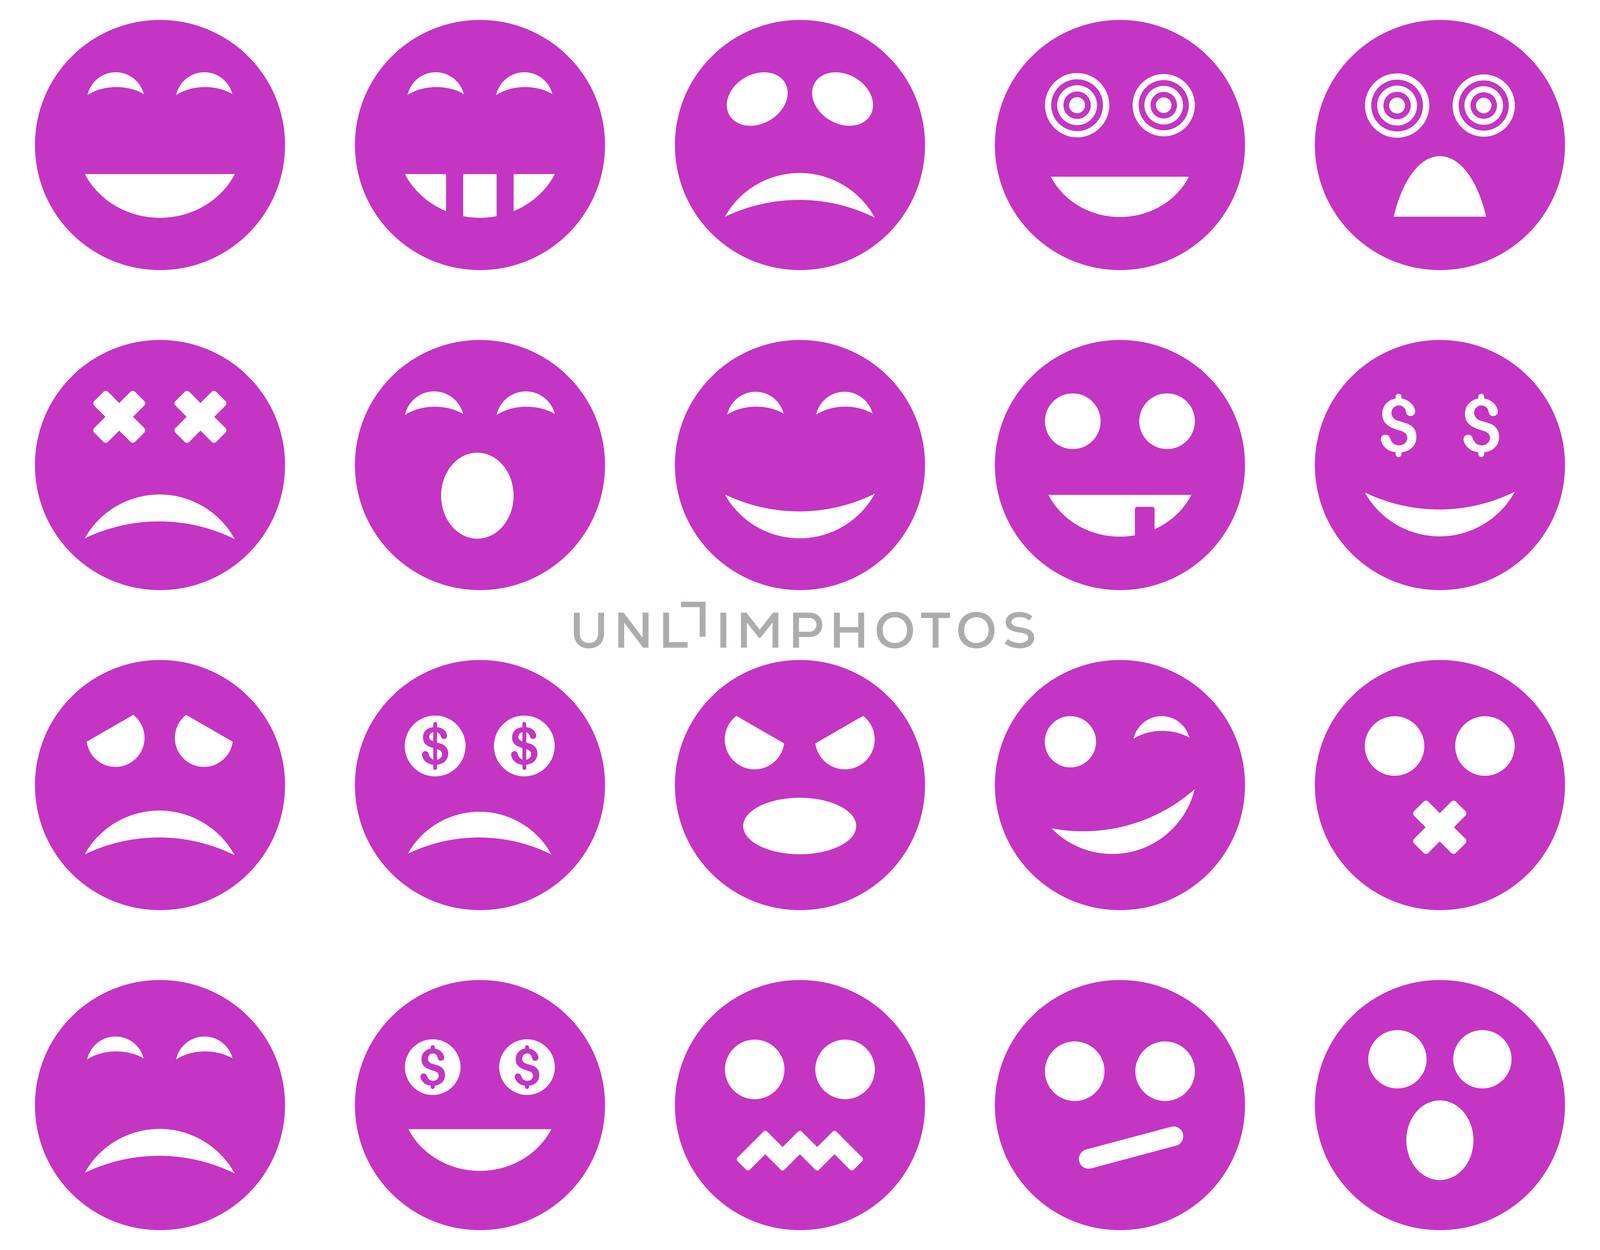 Smile and emotion icons. Glyph set style is flat images, violet symbols, isolated on a white background.